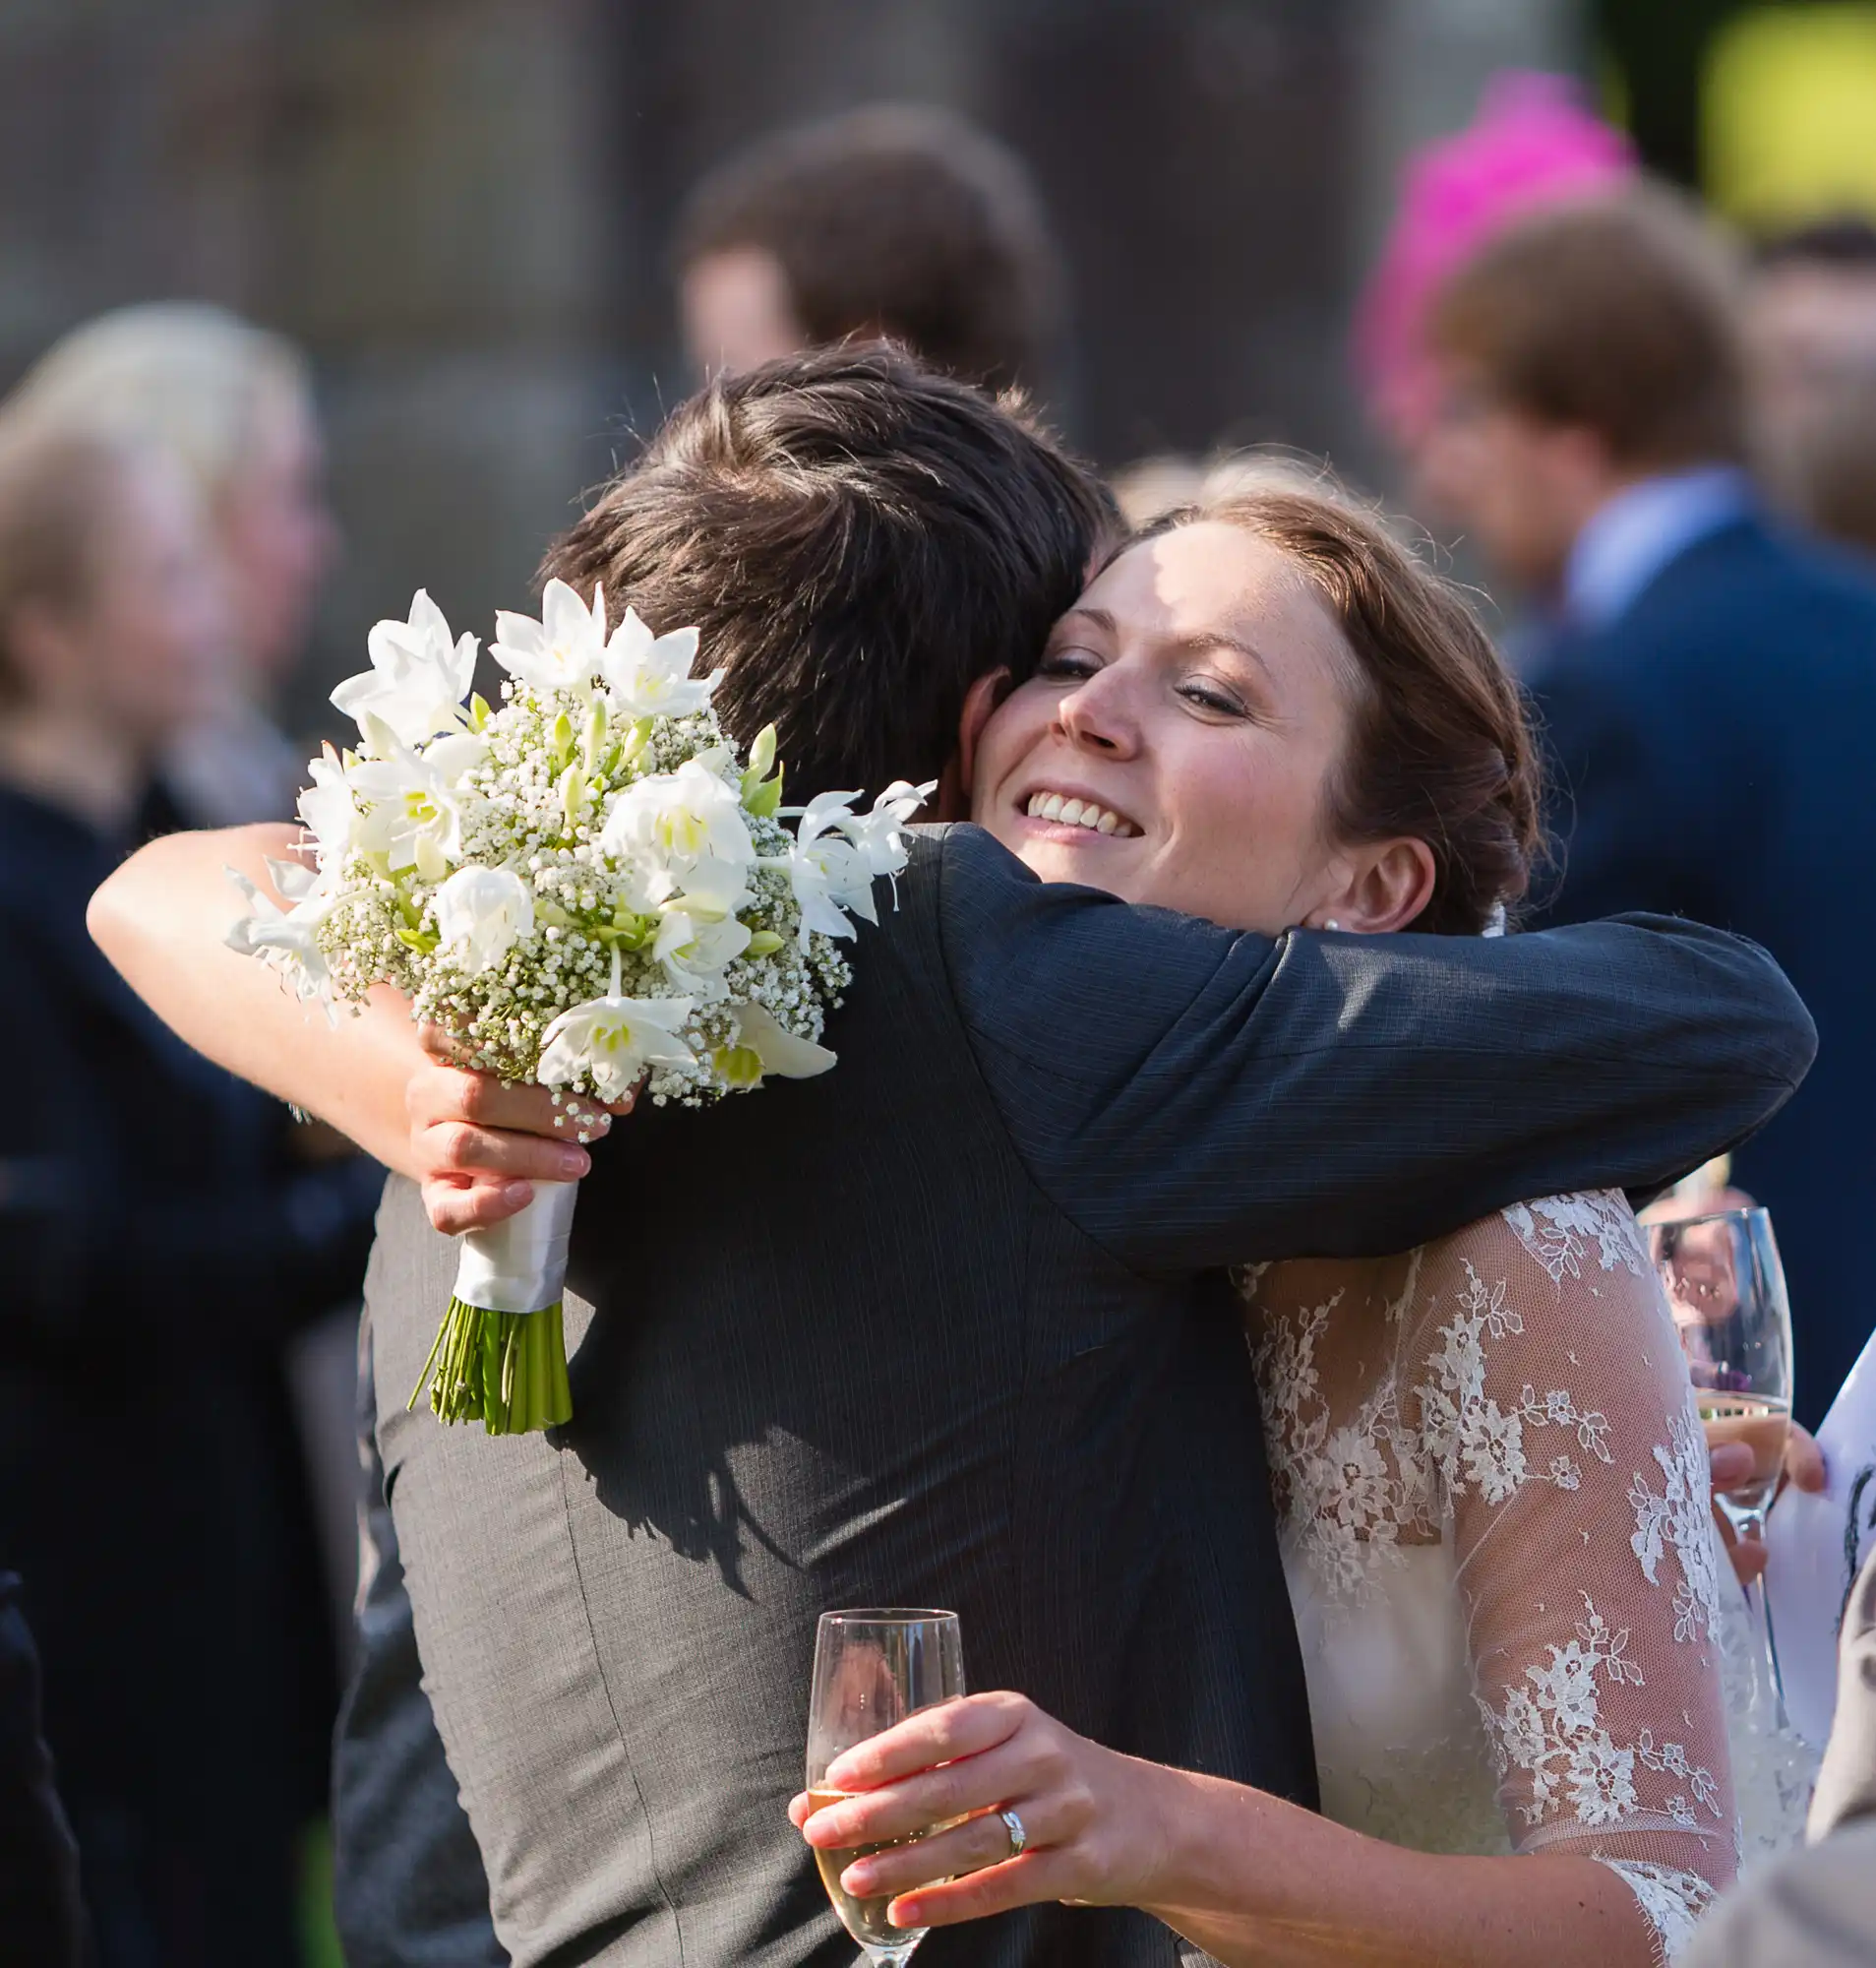 Bride in lace dress hugging a guest at a wedding, holding a bouquet of white flowers, with other guests in the background.